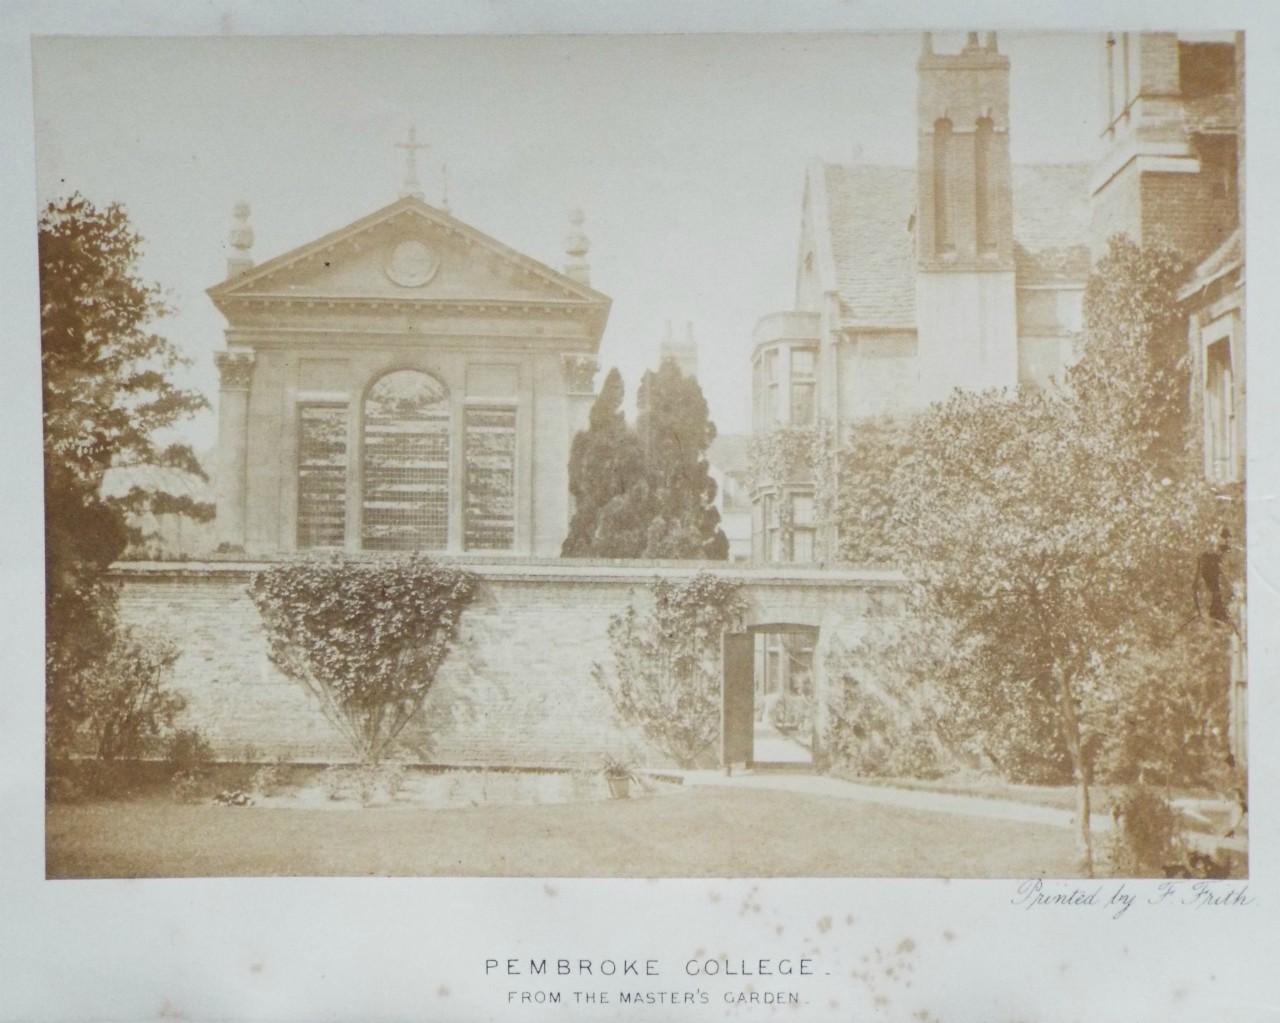 Photograph - Pembroke College - from the Master's Garden.